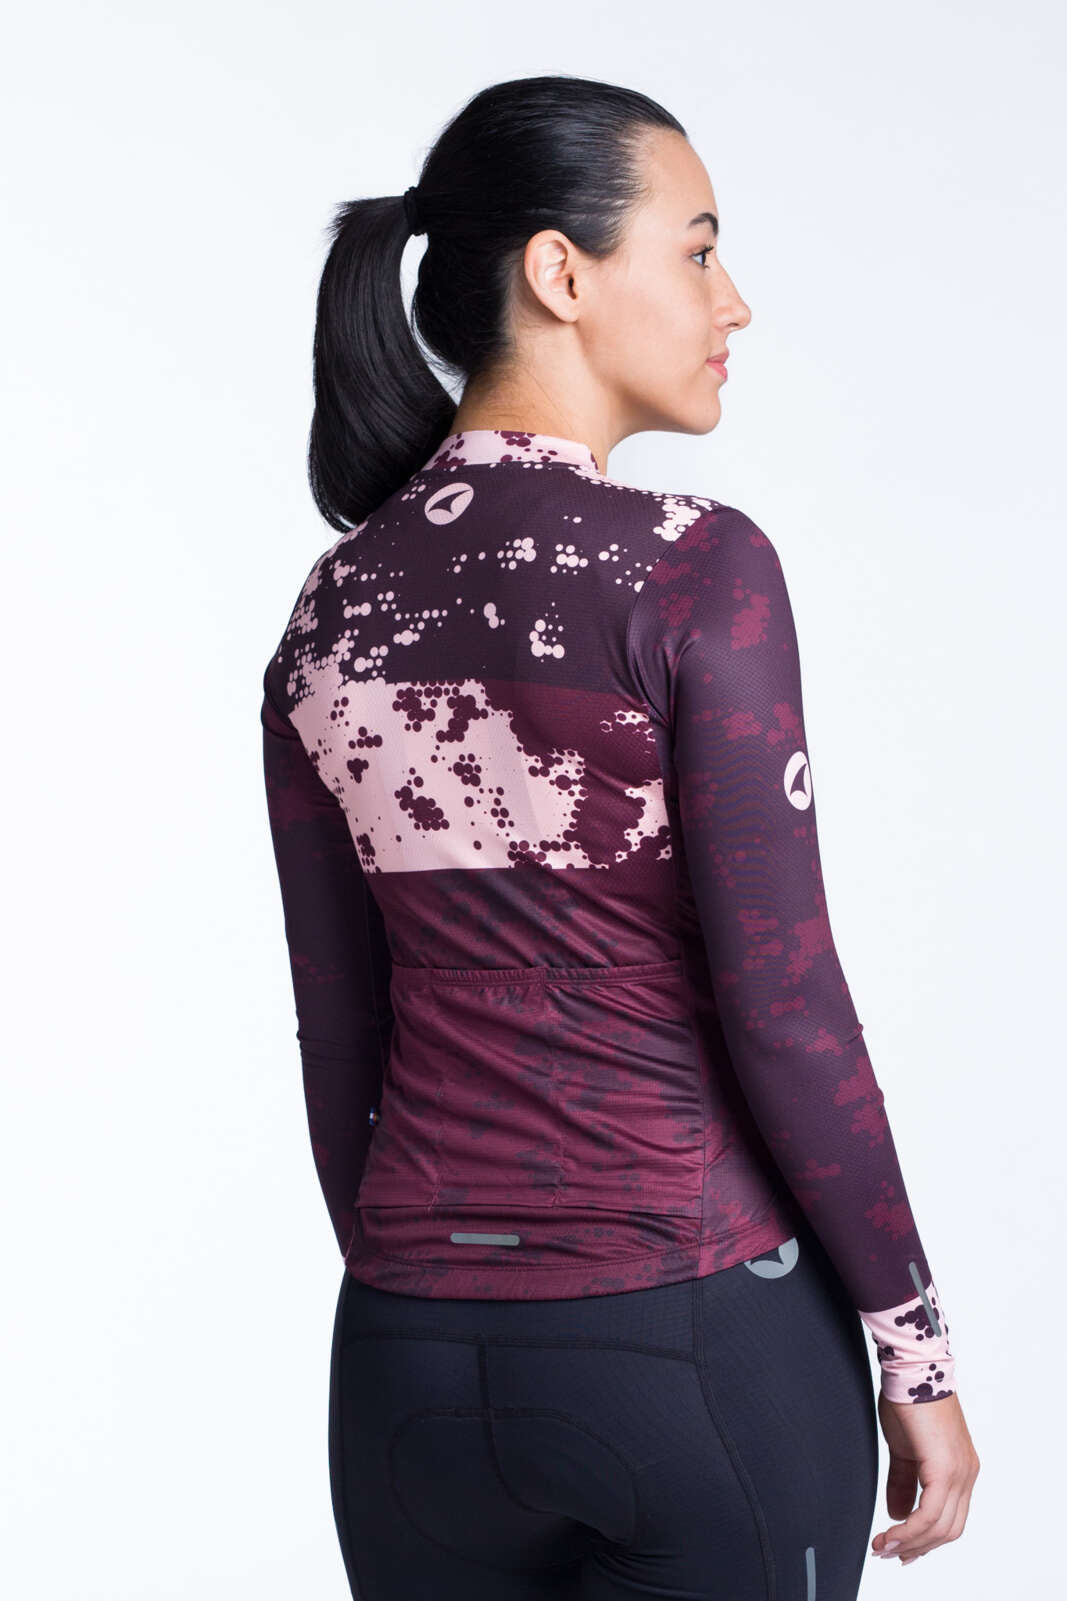 Women's Ascent Aero LS Jersey in Disperse Mulberry | Size: S by Pactimo